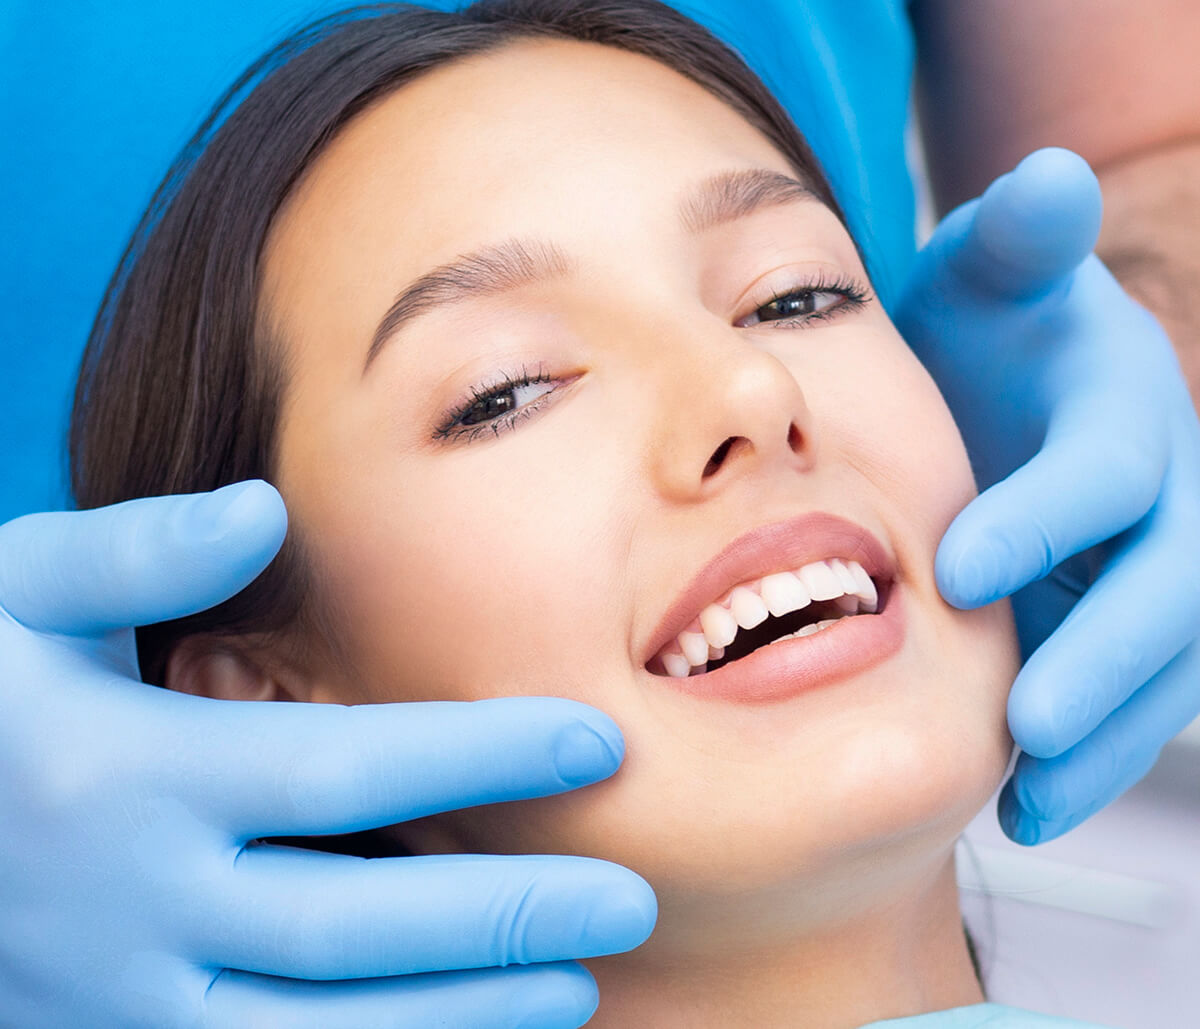 How to Find A Holistic Dental Practice